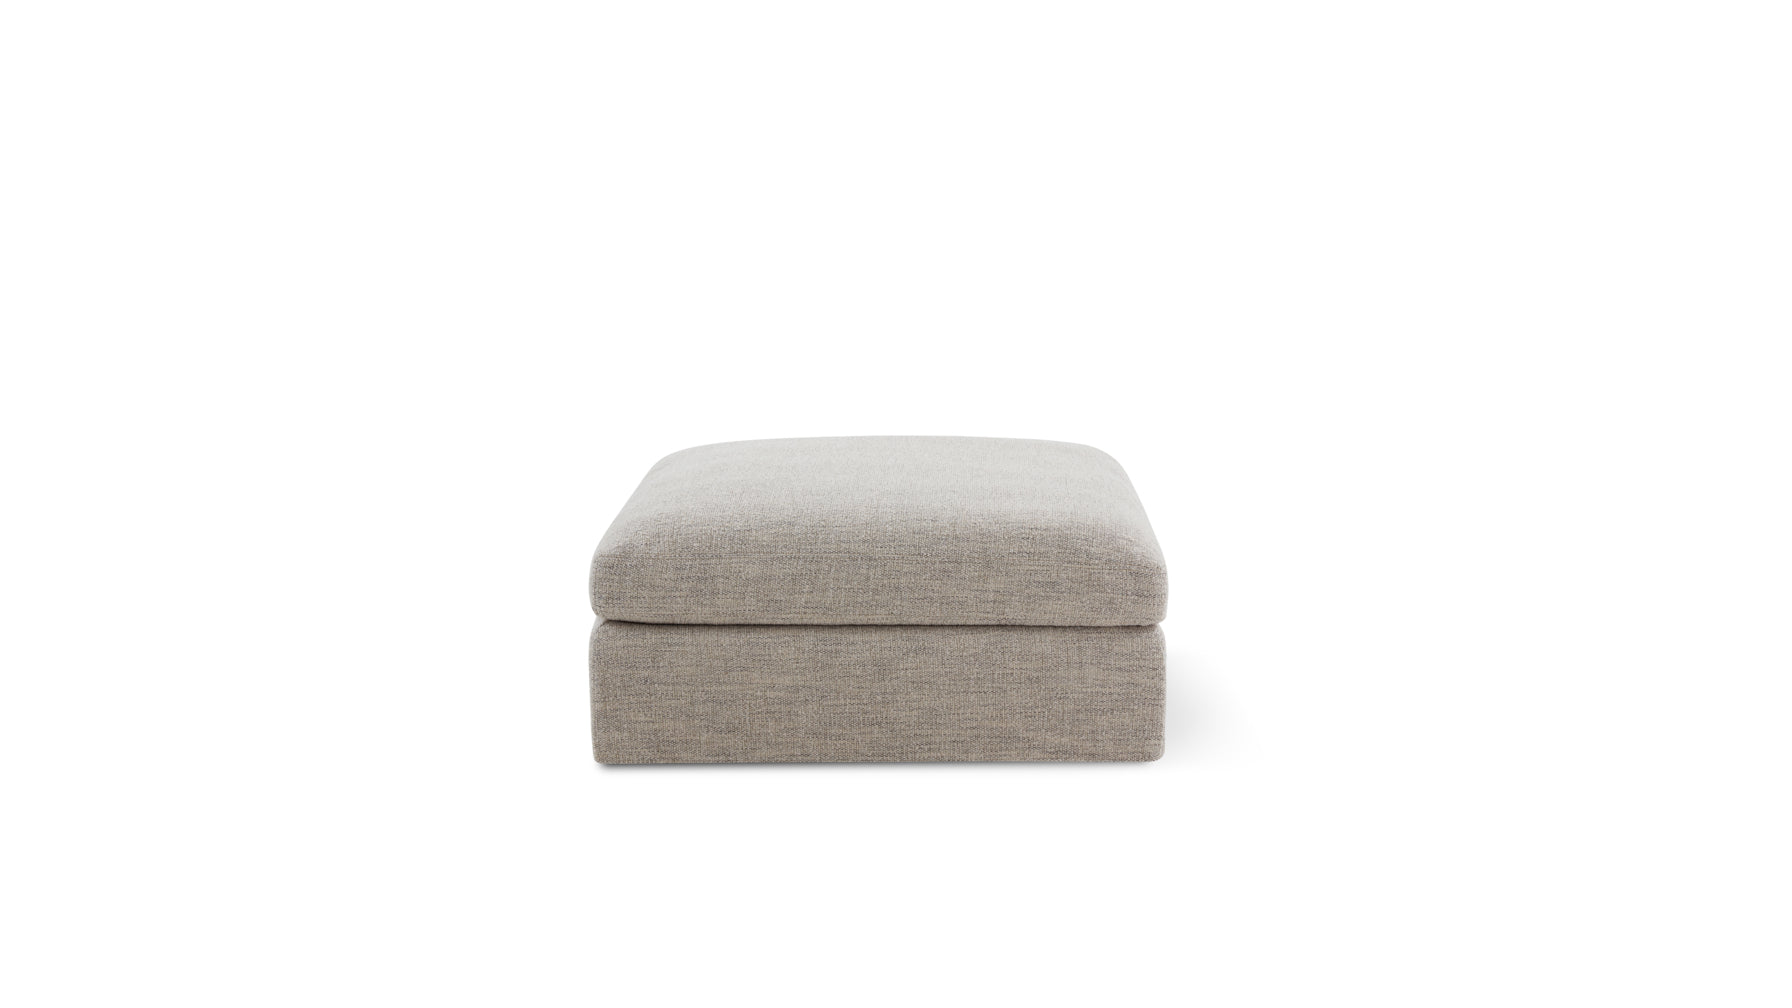 Get Together™ Ottoman, Large, Oatmeal - Image 1